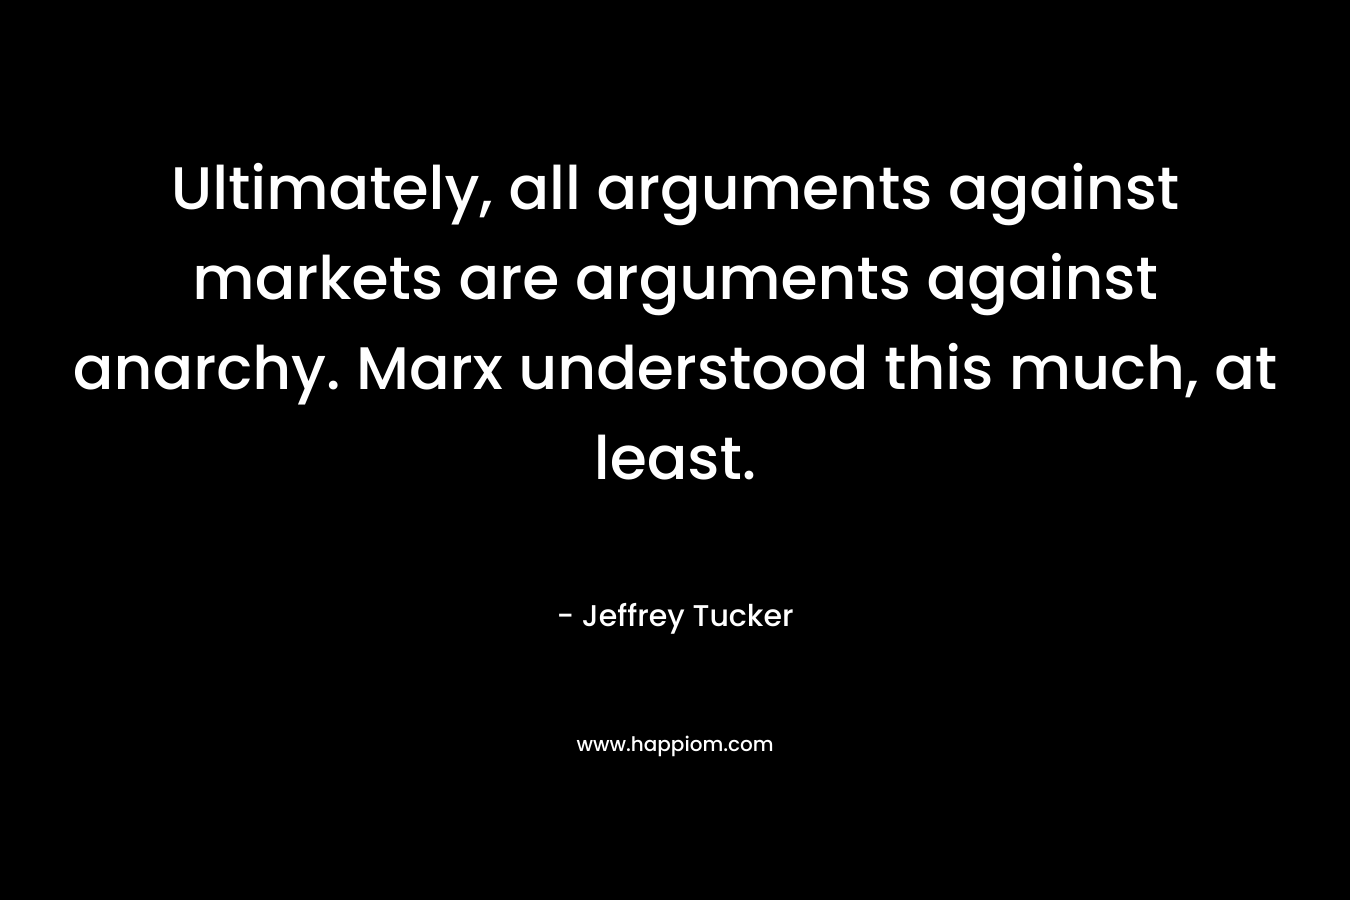 Ultimately, all arguments against markets are arguments against anarchy. Marx understood this much, at least. – Jeffrey Tucker